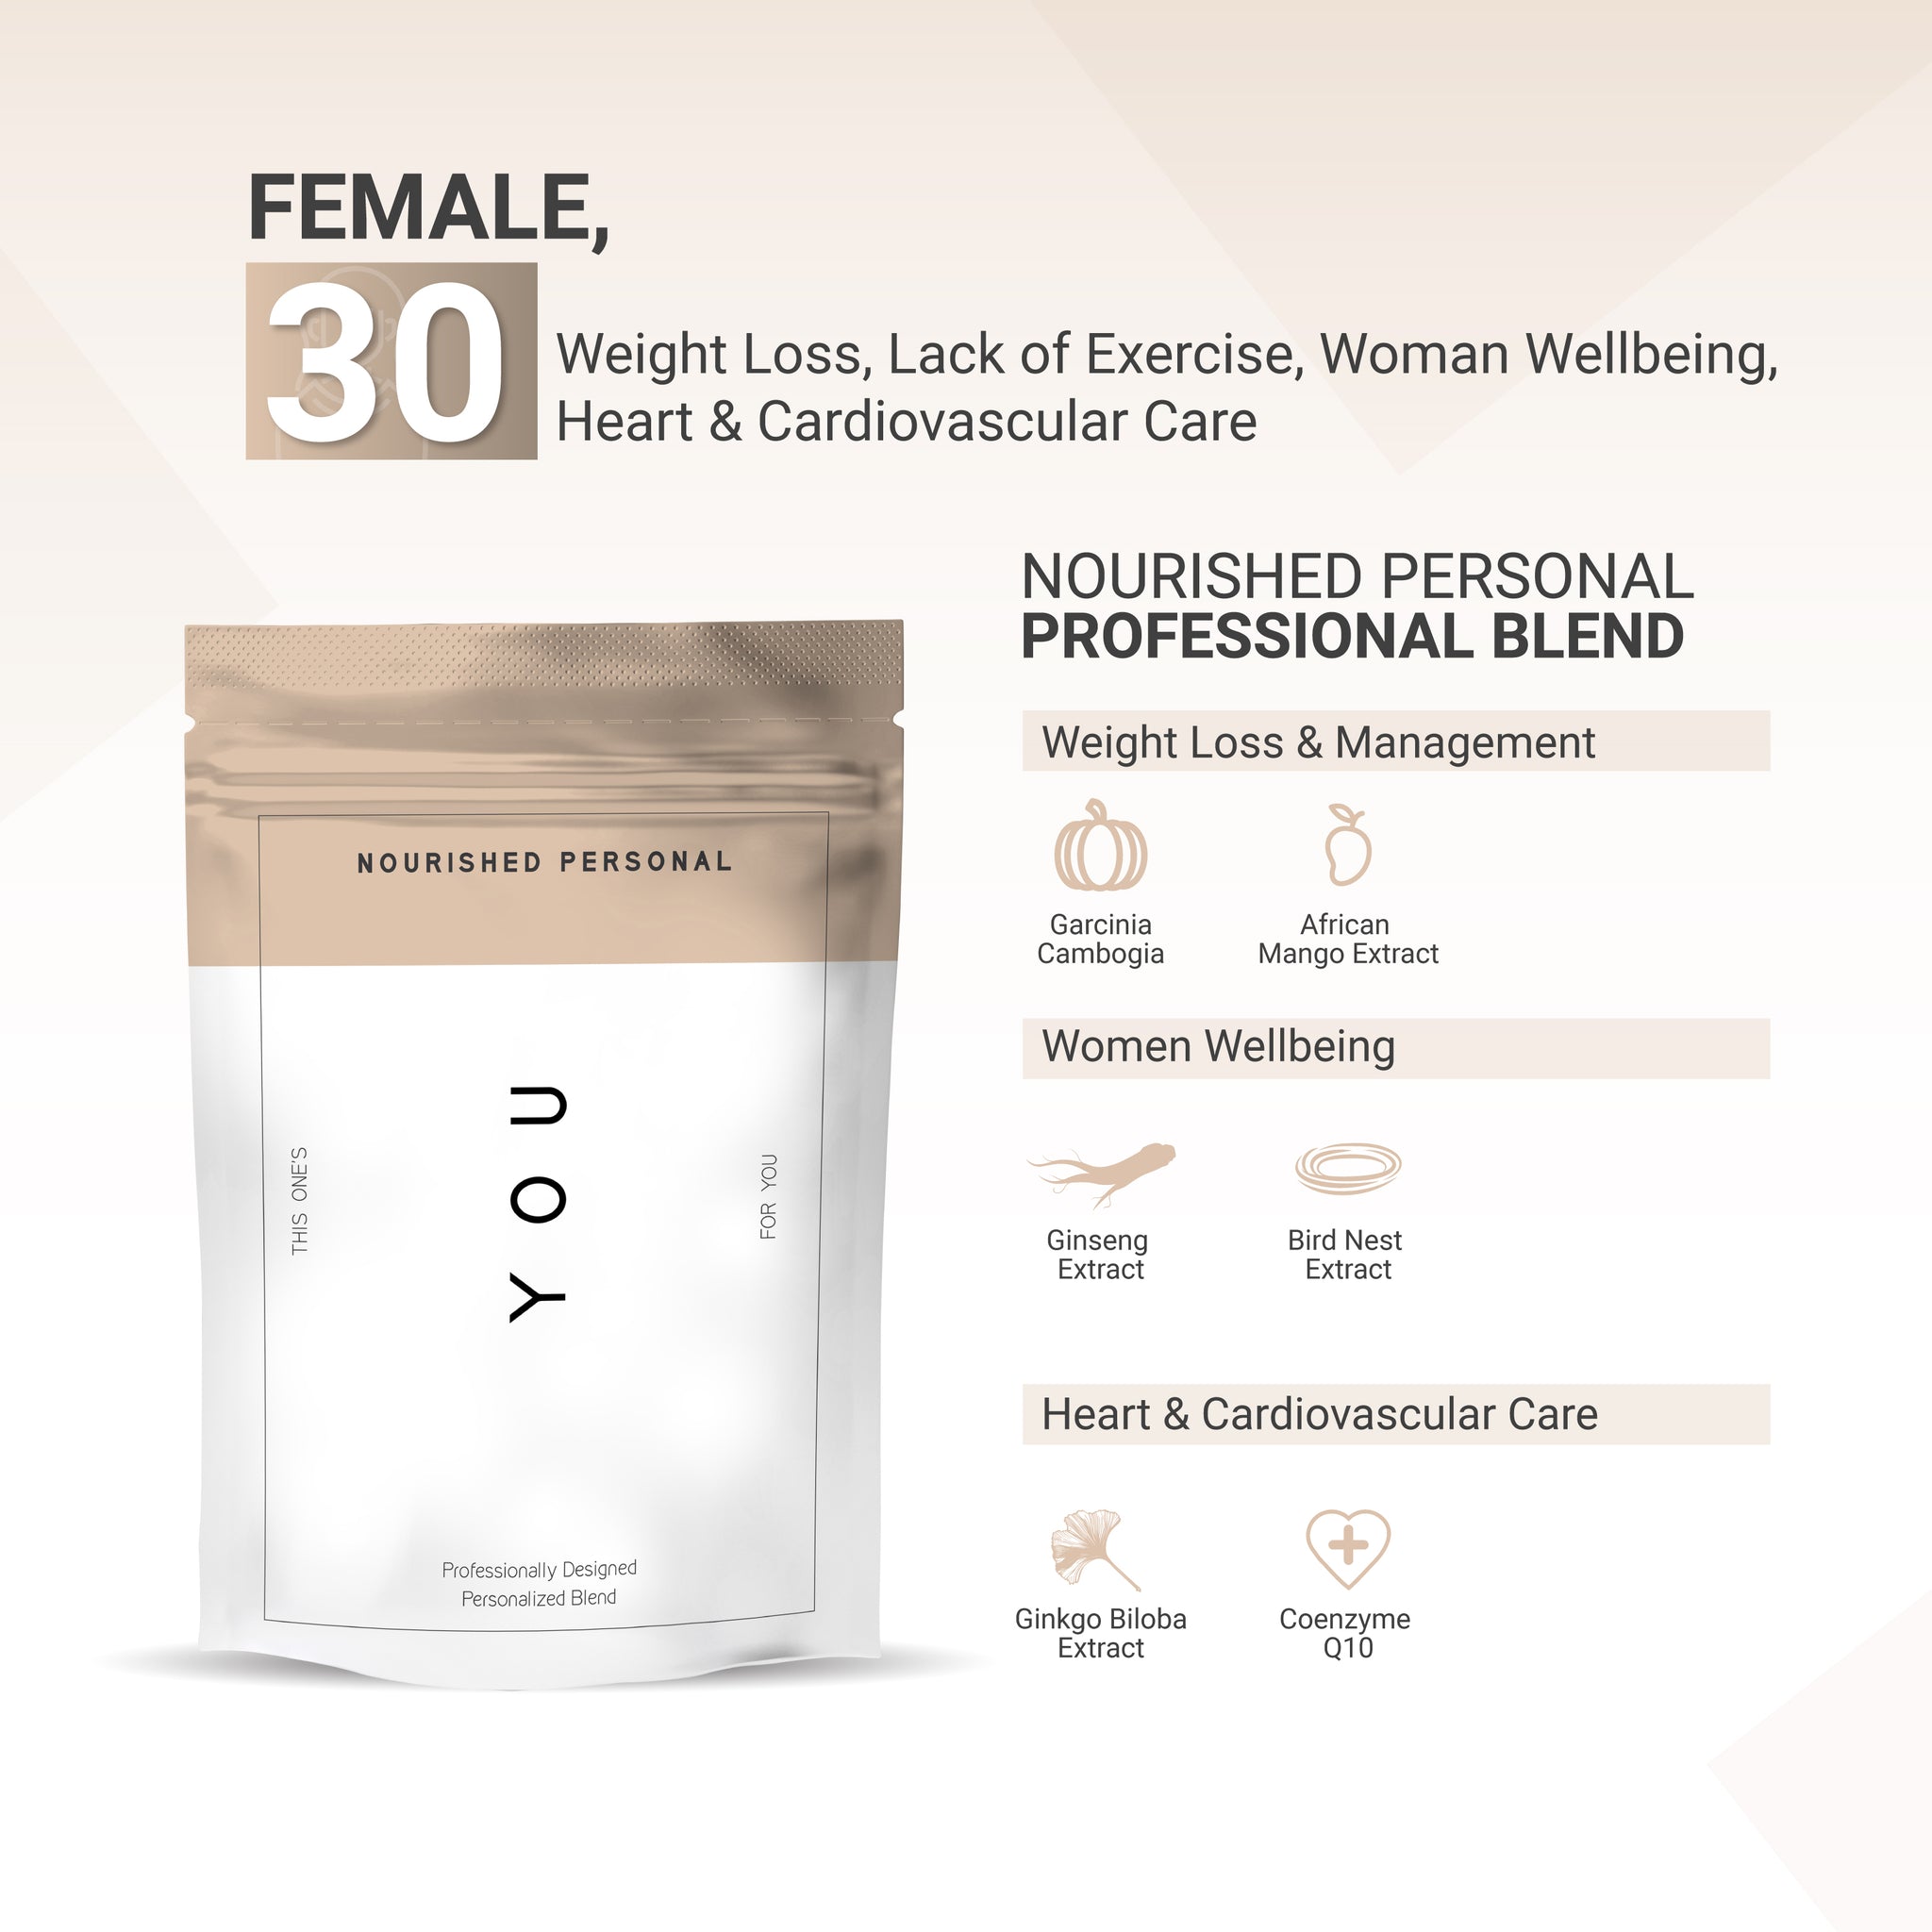 Case Study 4: Female, 30 - Weight Management, Woman Wellbeing, Heart Health